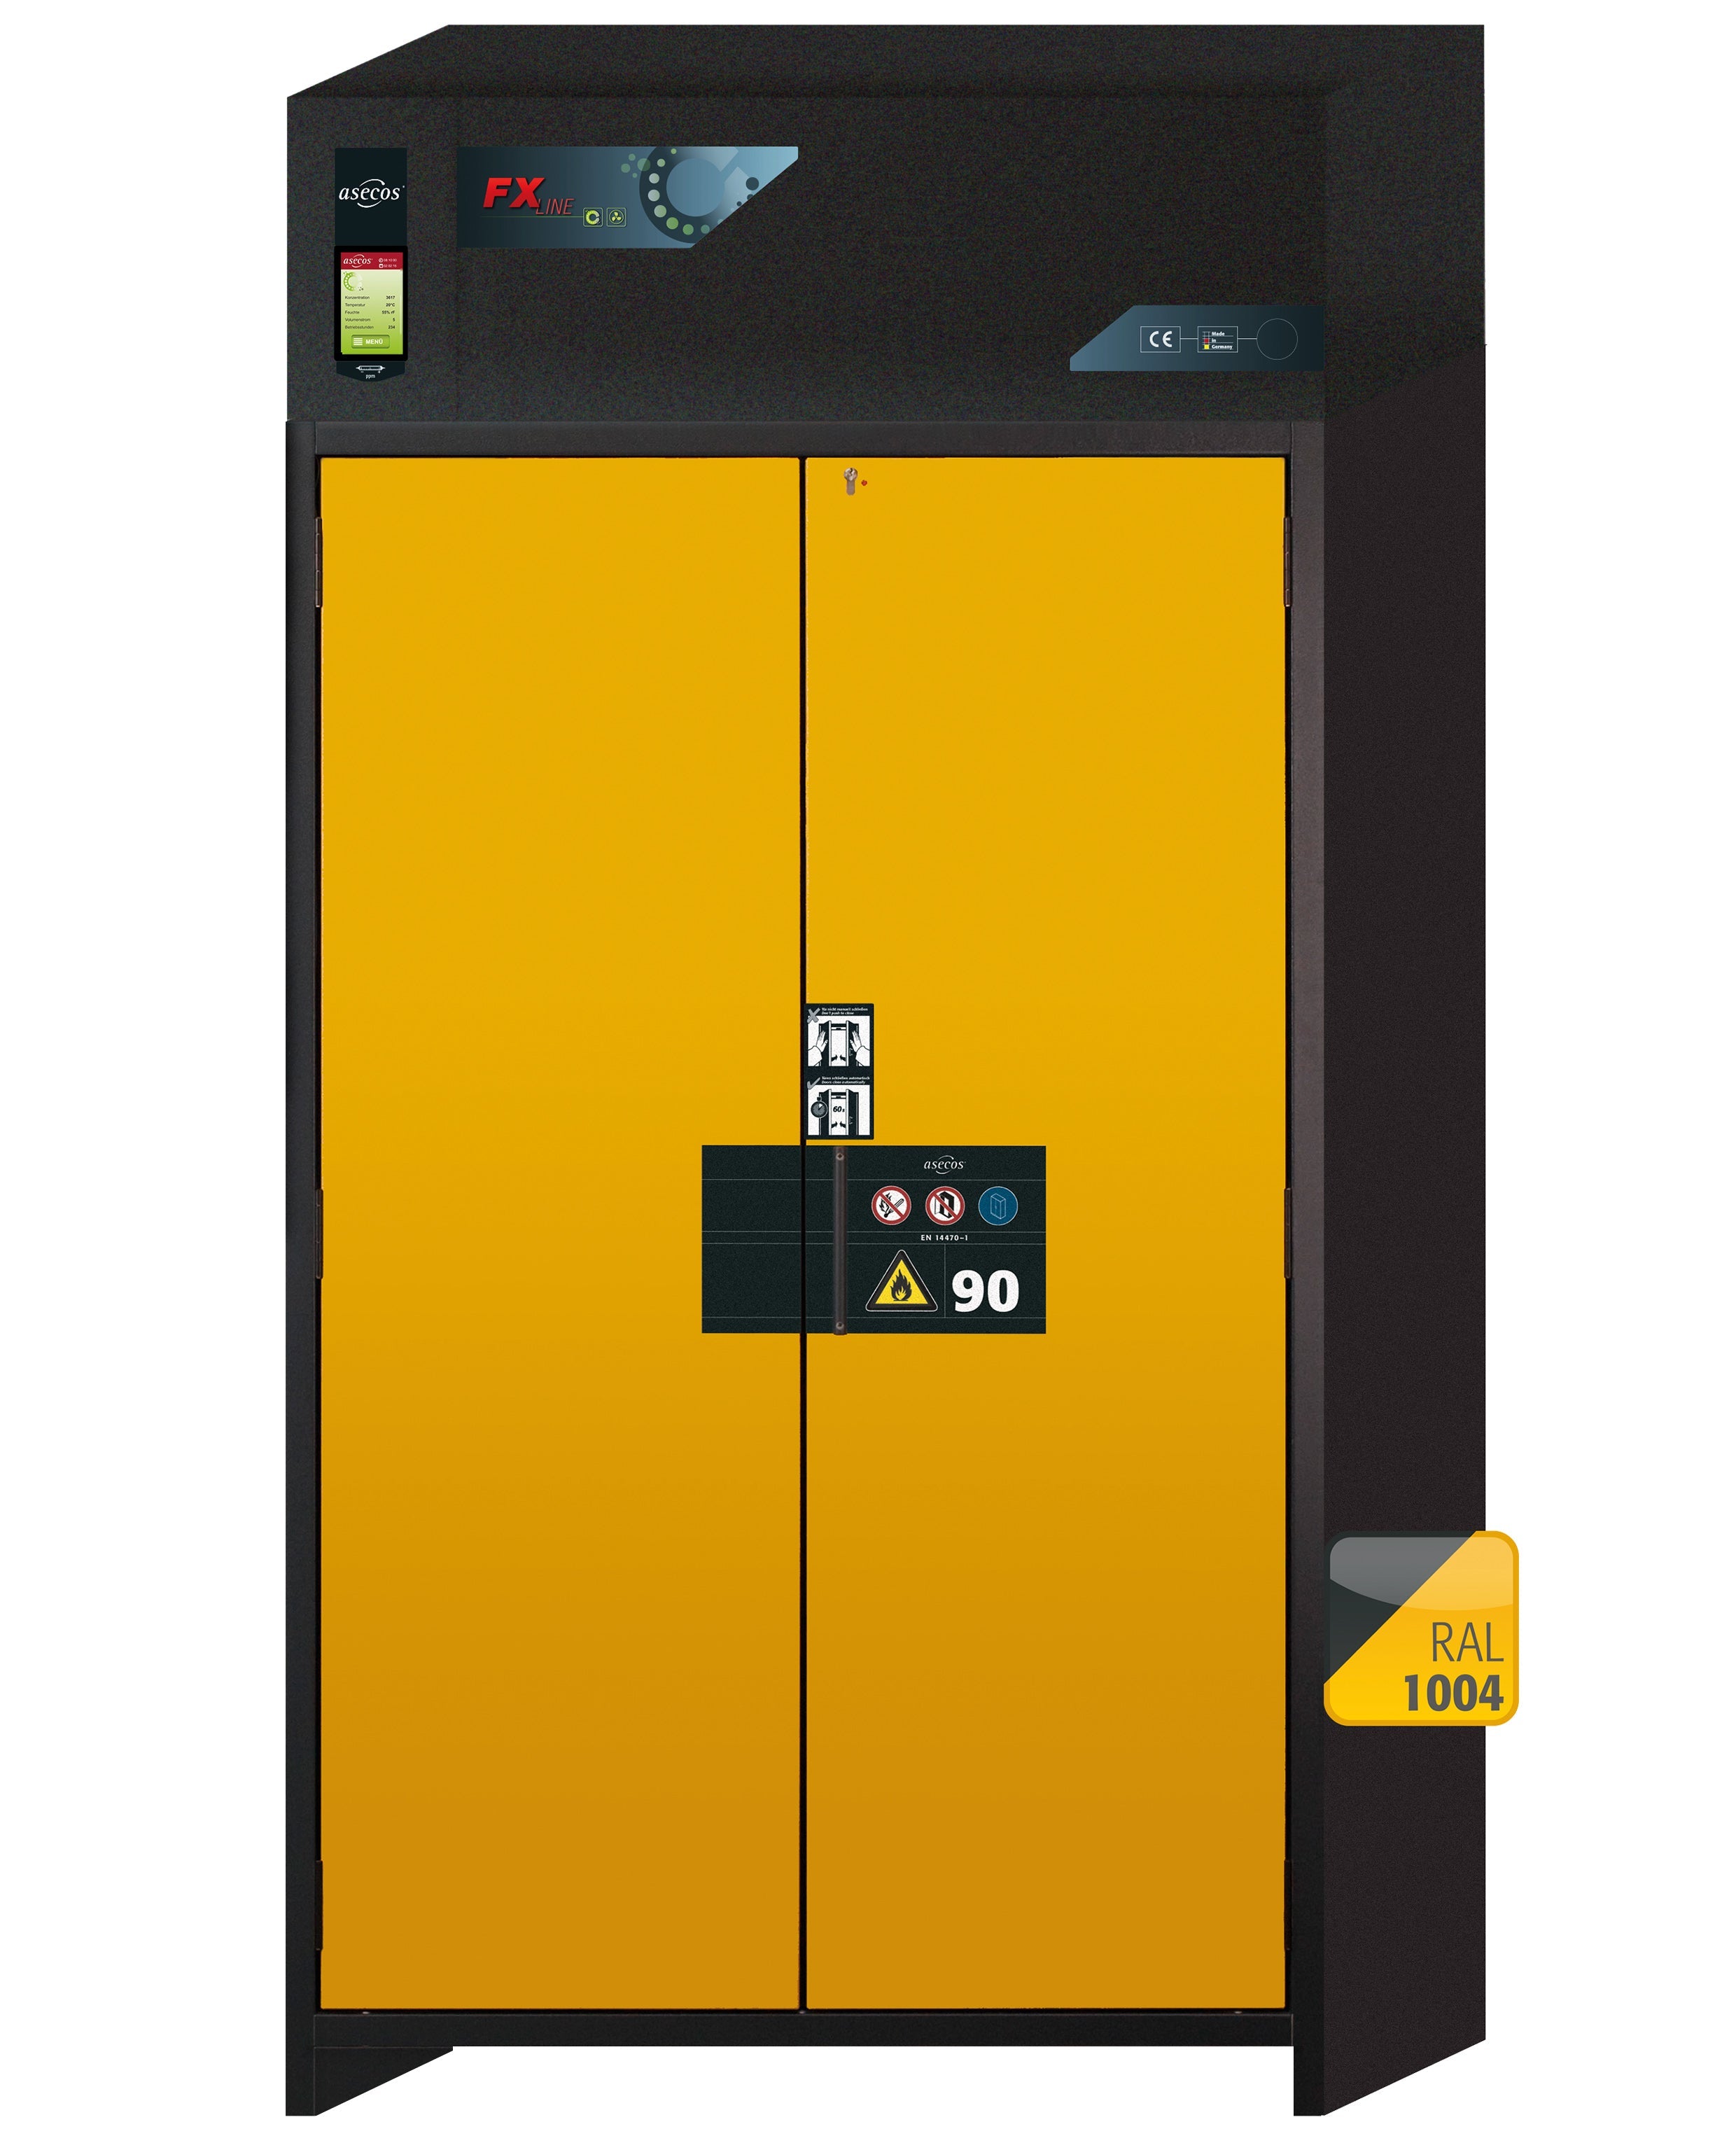 Type 90 recirculating air filter cabinet FX-PEGASUS-90 model FX90.229.120.WDAC in safety yellow RAL 1004 with 3x standard tray base (sheet steel)